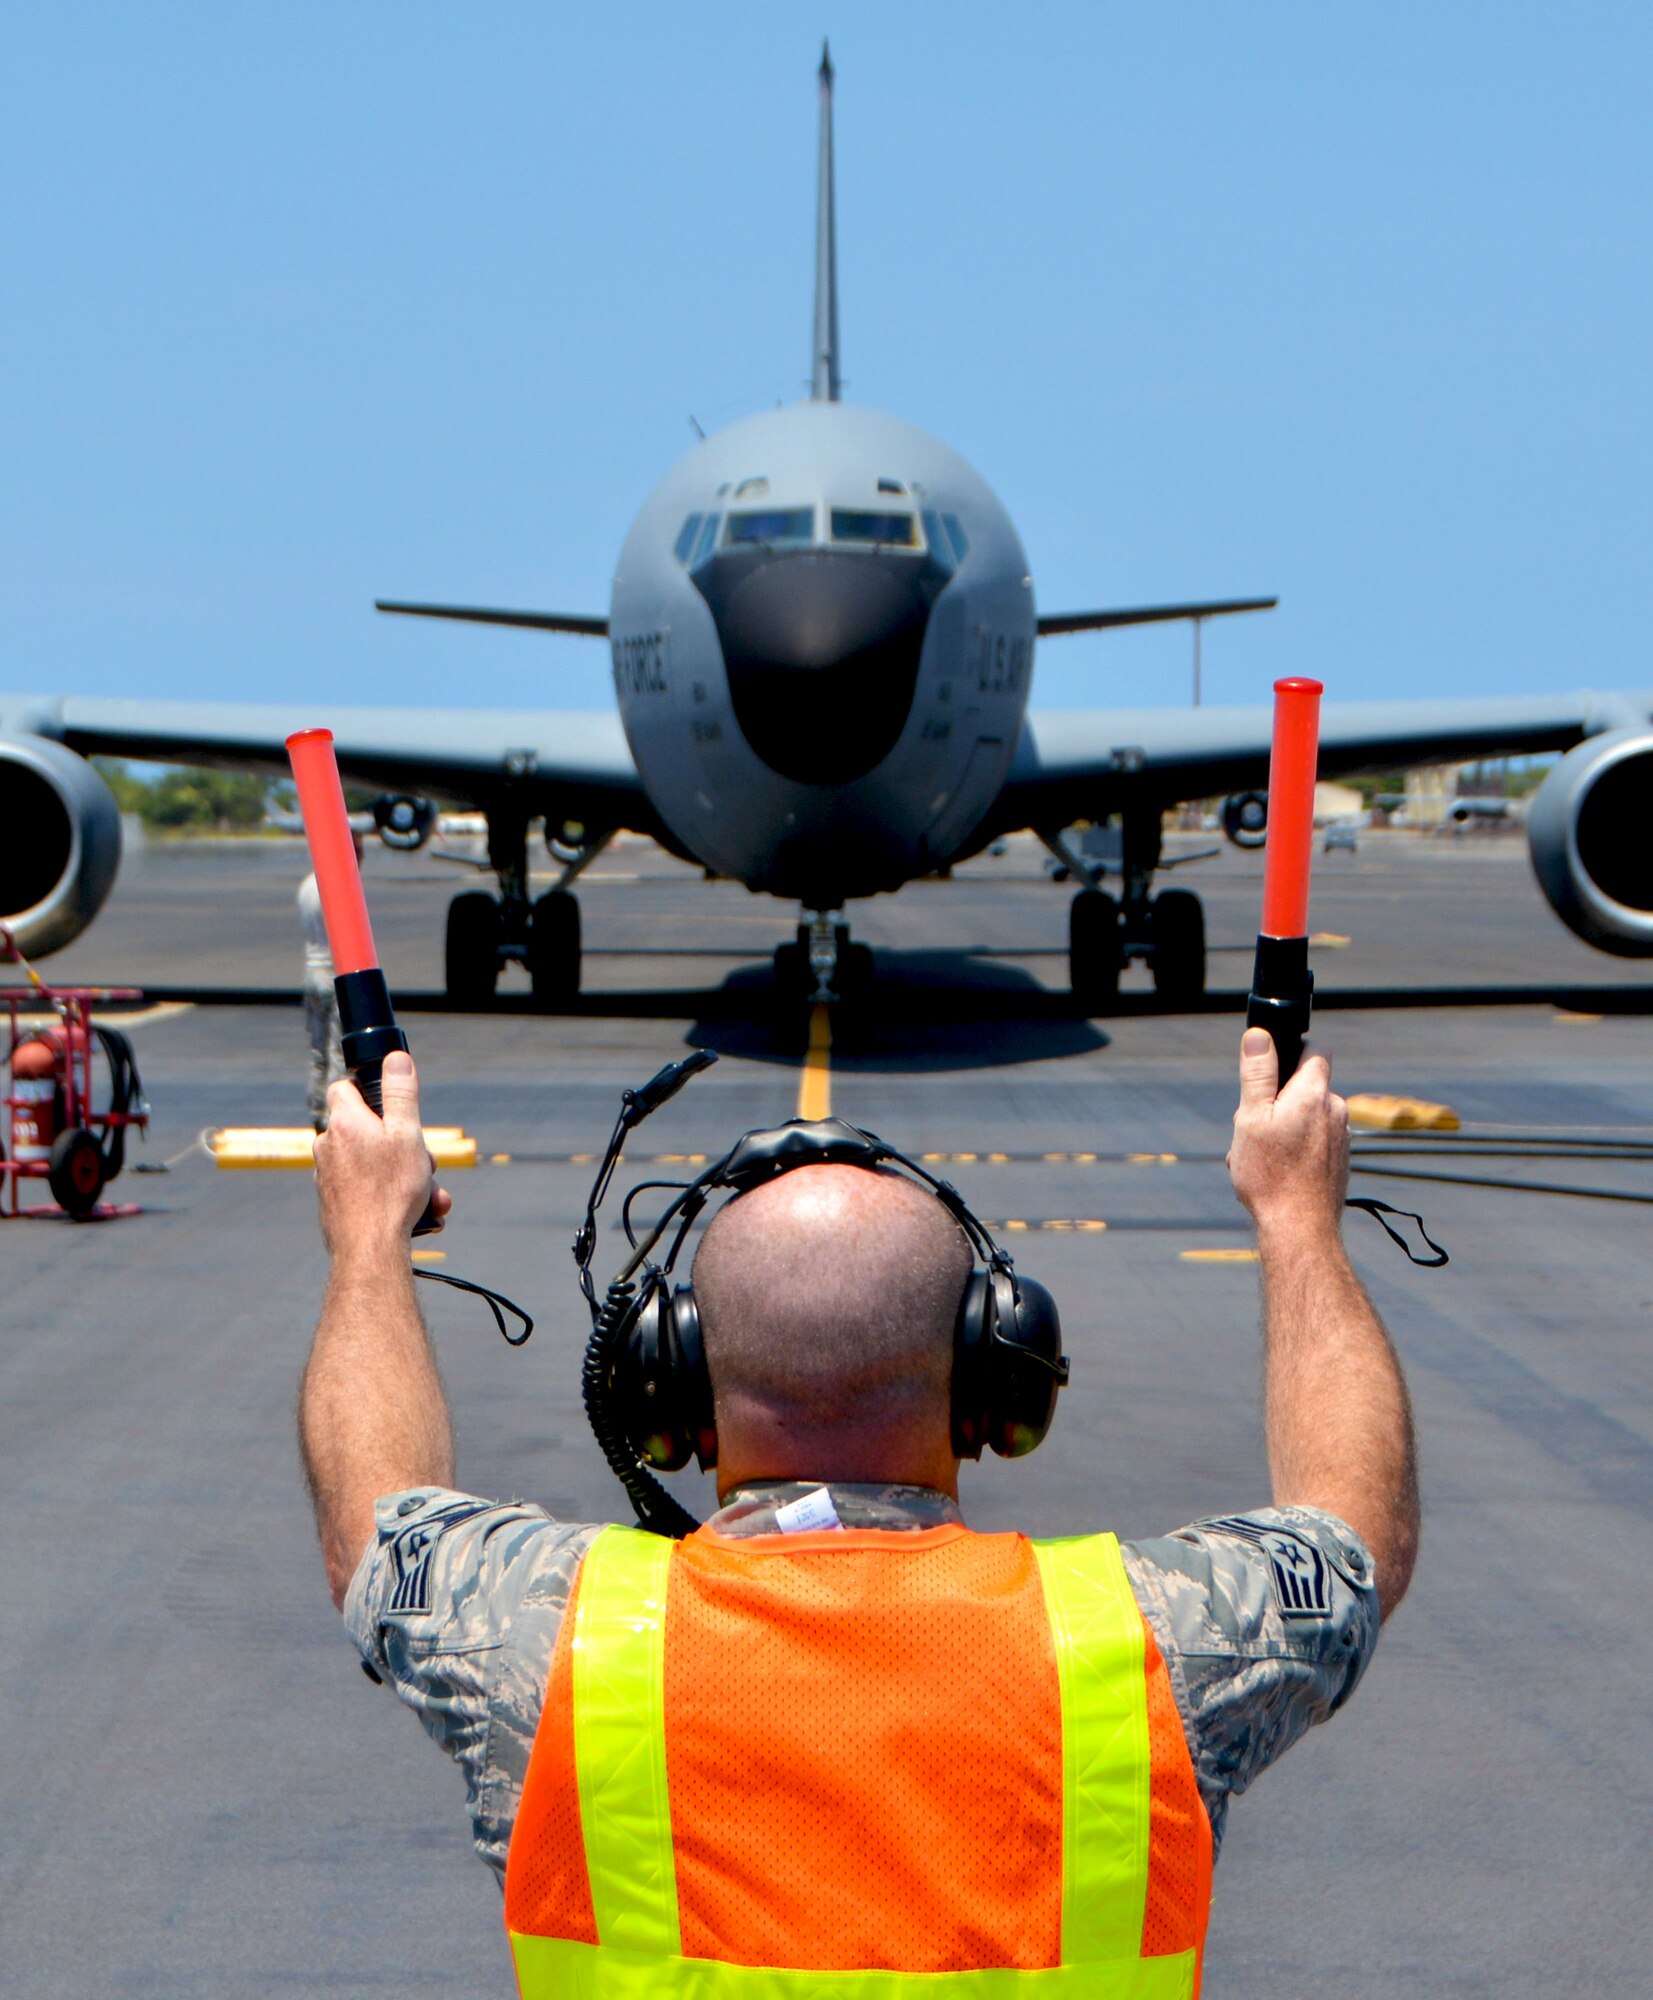 Staff Sgt. Donnie Walters, 507th Aircraft Maintenance Squadron crew chief from Tinker Air Force Base, Oklahoma, marshalls in a 97th Air Mobility Wing KC-135 Stratotanker from Altus Air Force Base, Oklahoma, during the Rim of the Pacific (RIMPAC) exercise July 16. Twenty-five nations, 46 ships, five submarines, and about 200 aircraft and 25,000 personnel are participating in RIMPAC from June 27 to Aug. 2 in and around the Hawaiian Islands and Southern California. The world’s largest international maritime exercise, RIMPAC provides a unique training opportunity while fostering and sustaining cooperative relationships among participants critical to ensuring the safety of sea lanes and security of the world’s oceans. RIMPAC 2018 is the 26th exercise in the series that began in 1971. (U.S. Air Force photo by Tech. Sgt. Samantha Mathison)